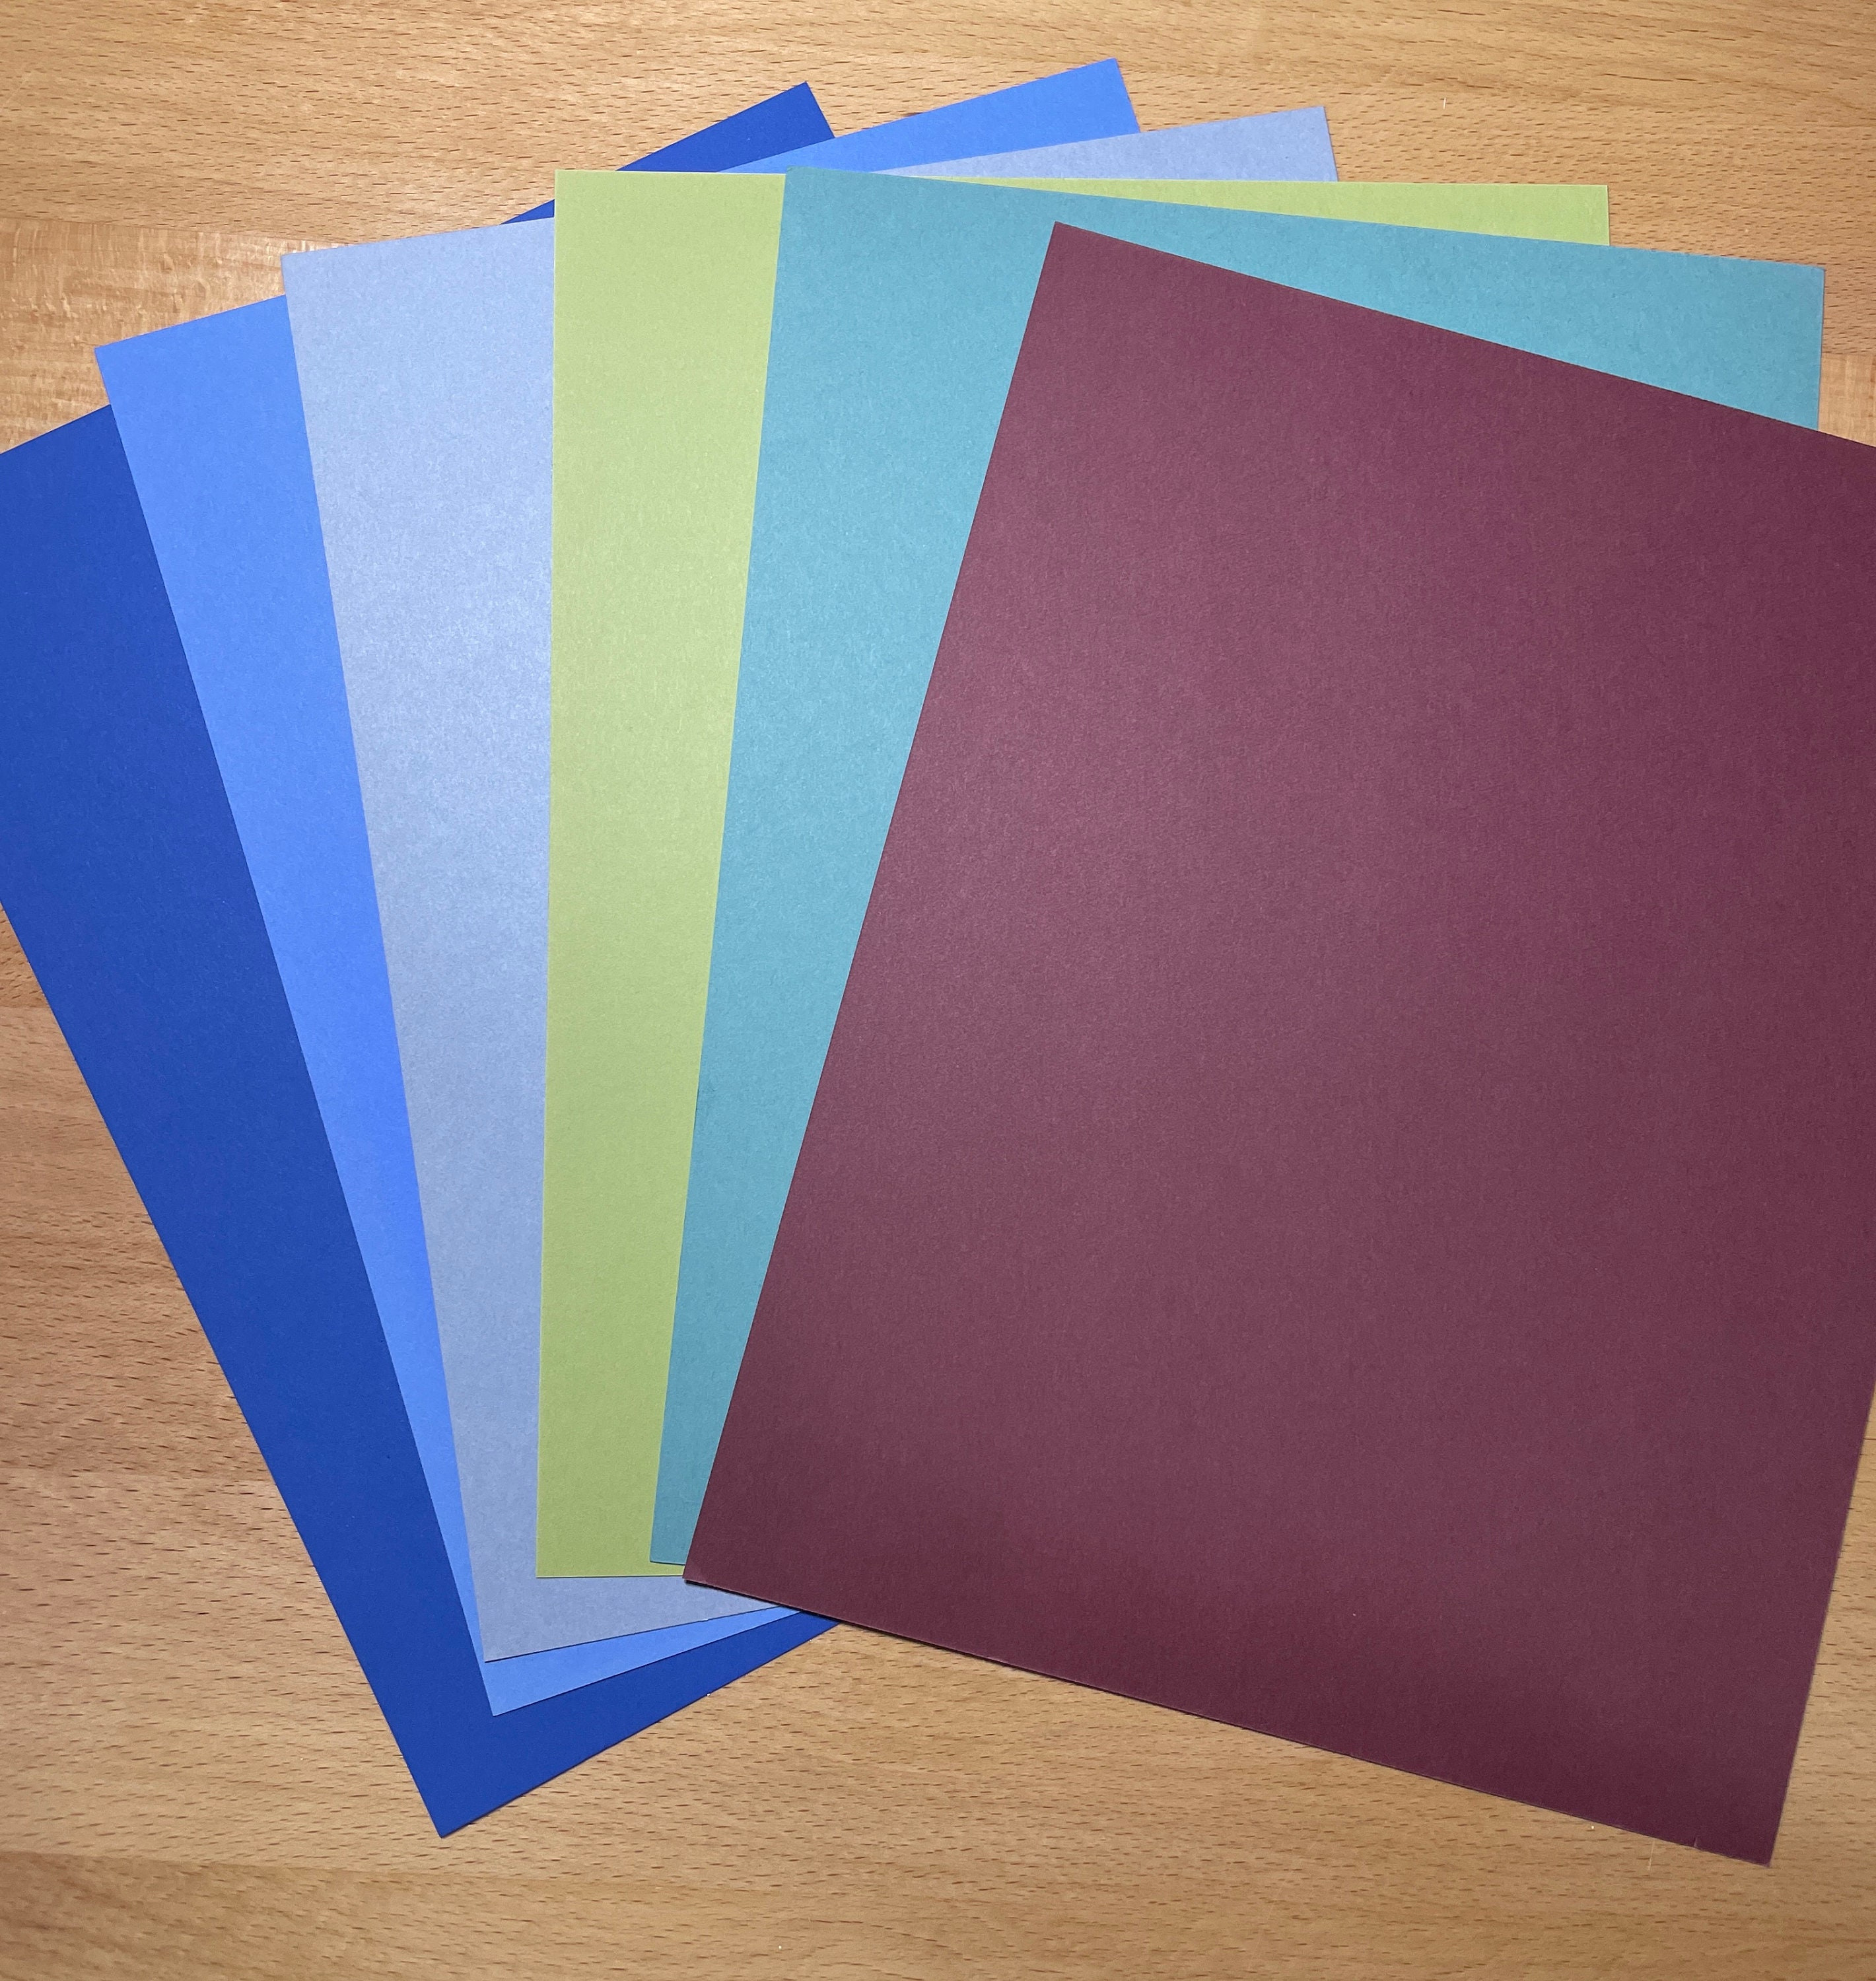  48 Sheets 12x12 Solid Core Colorful Cardstock Textured 85Lb  Multi Colored Card Stock Paper 16 Assorted Colors for Cricut Card Making :  Arts, Crafts & Sewing